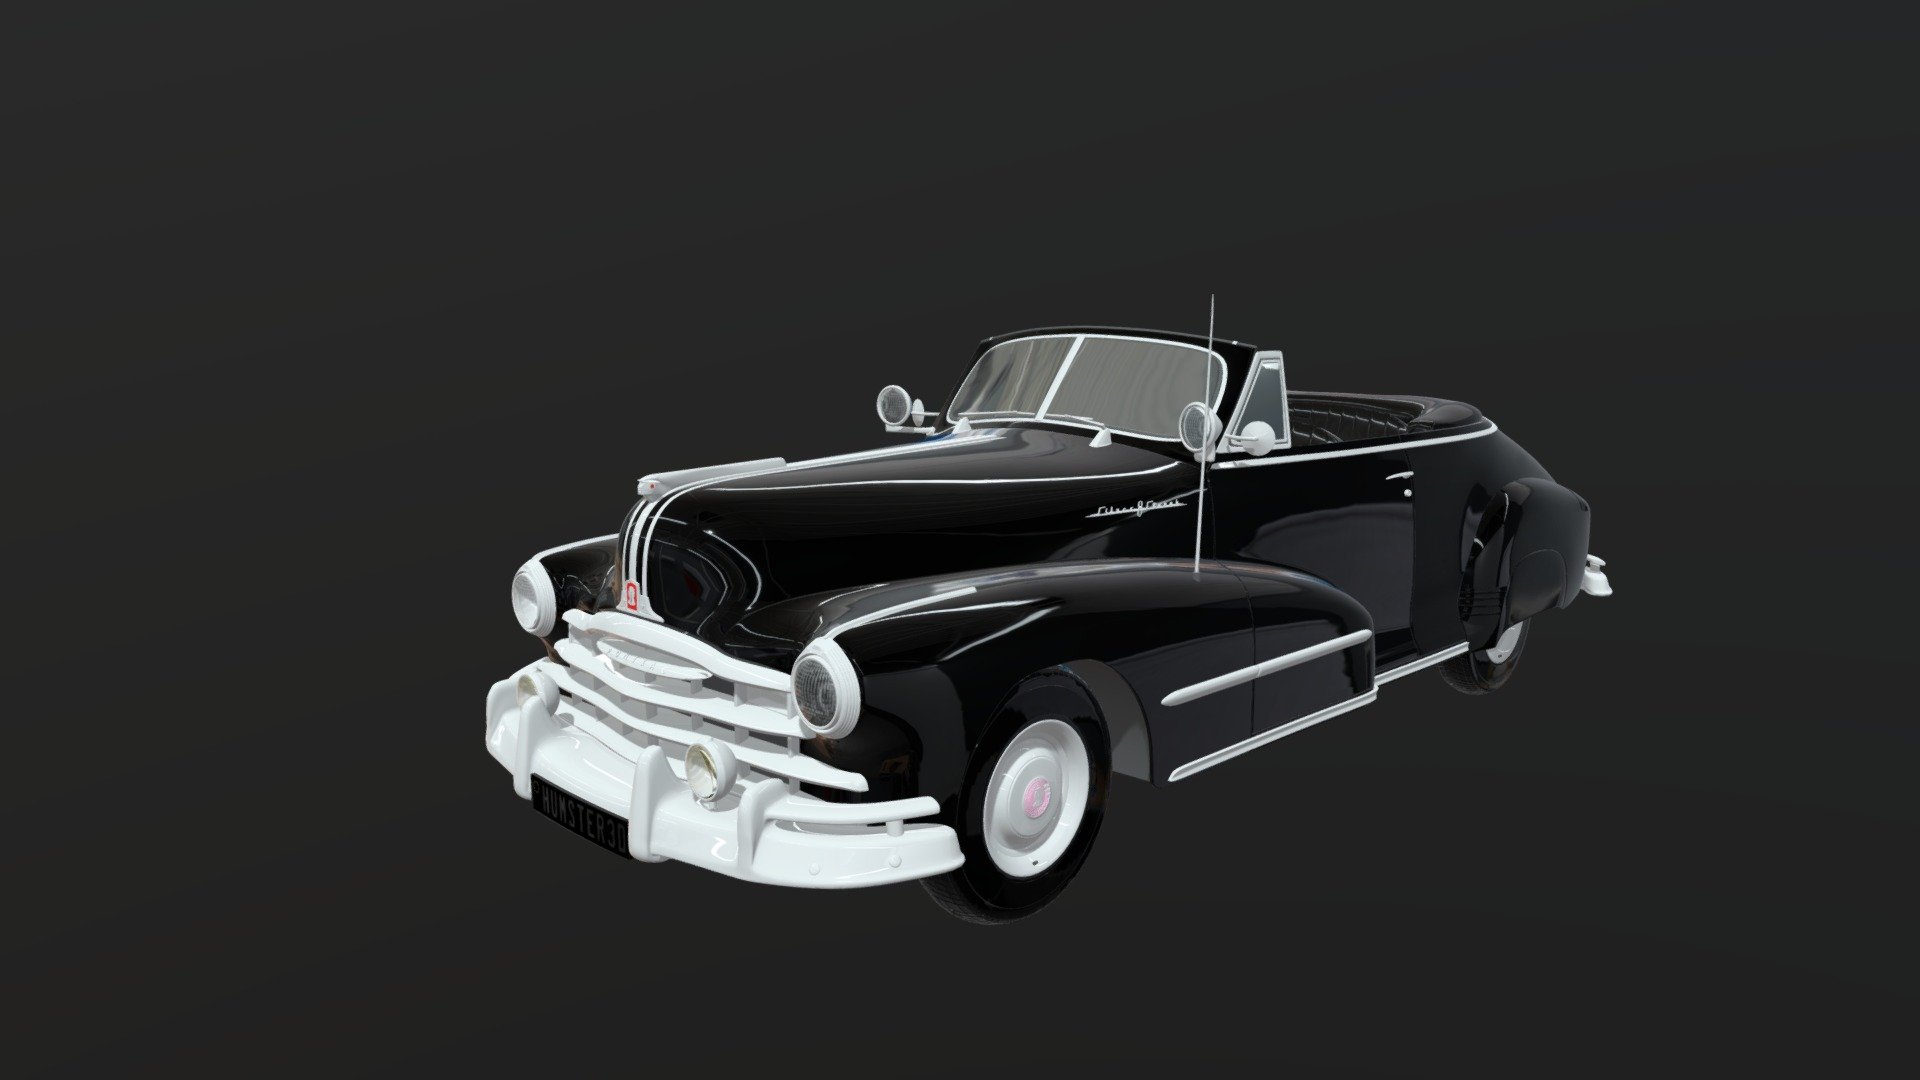 Ford Super Deluxe Convertible 1946 Car 3d Model
BY): AAA-GAME STUDIO - Ford Super Deluxe Convertible 1946 Car 3d Model - 3D model by Aritro-3d (@Aritro3d) 3d model